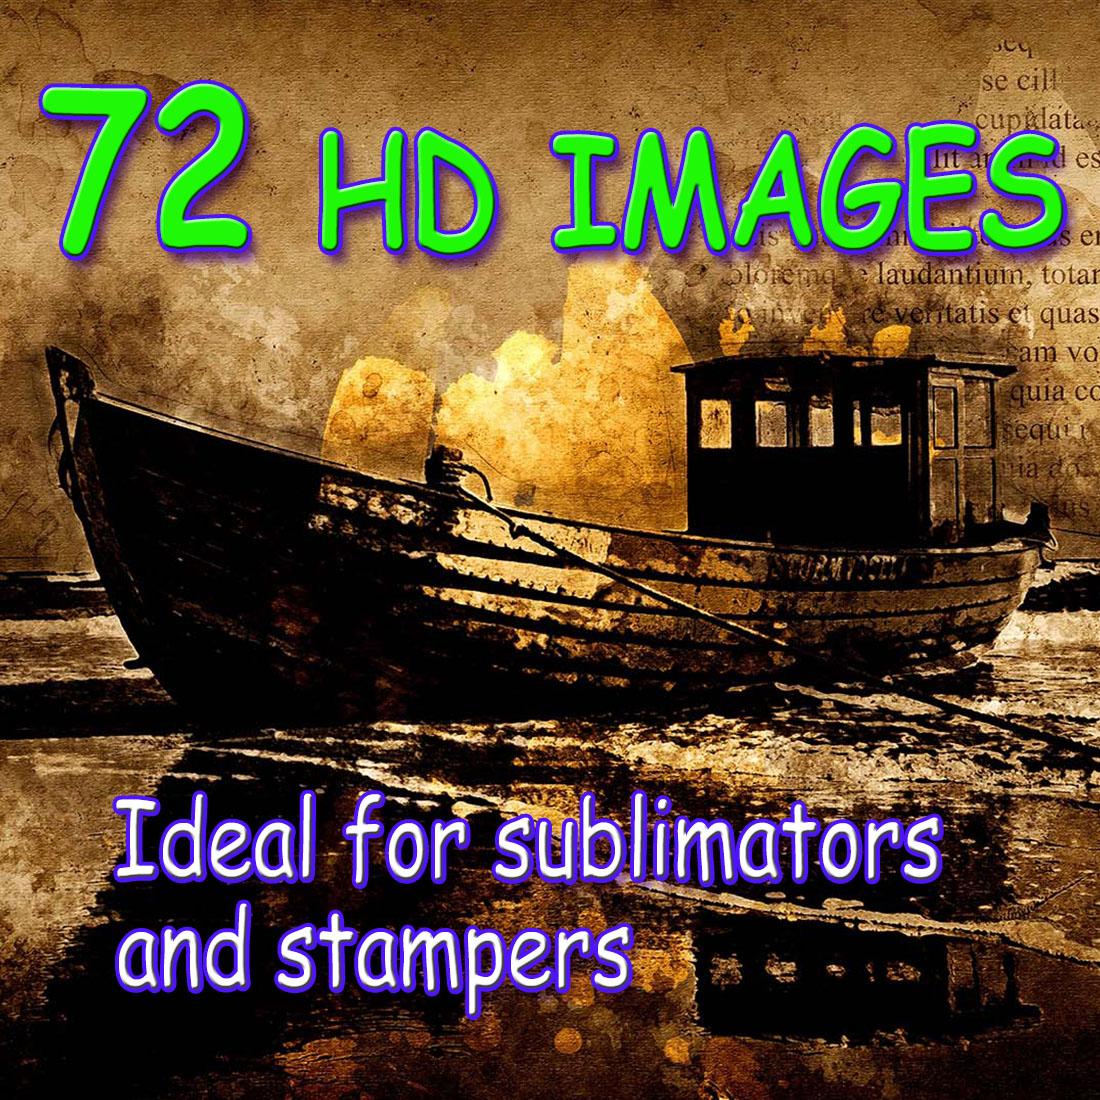 SHIP AND TRANSPORT – Bundle Of 72 HQ 300 dpi Graphics Ready To Print cover image.